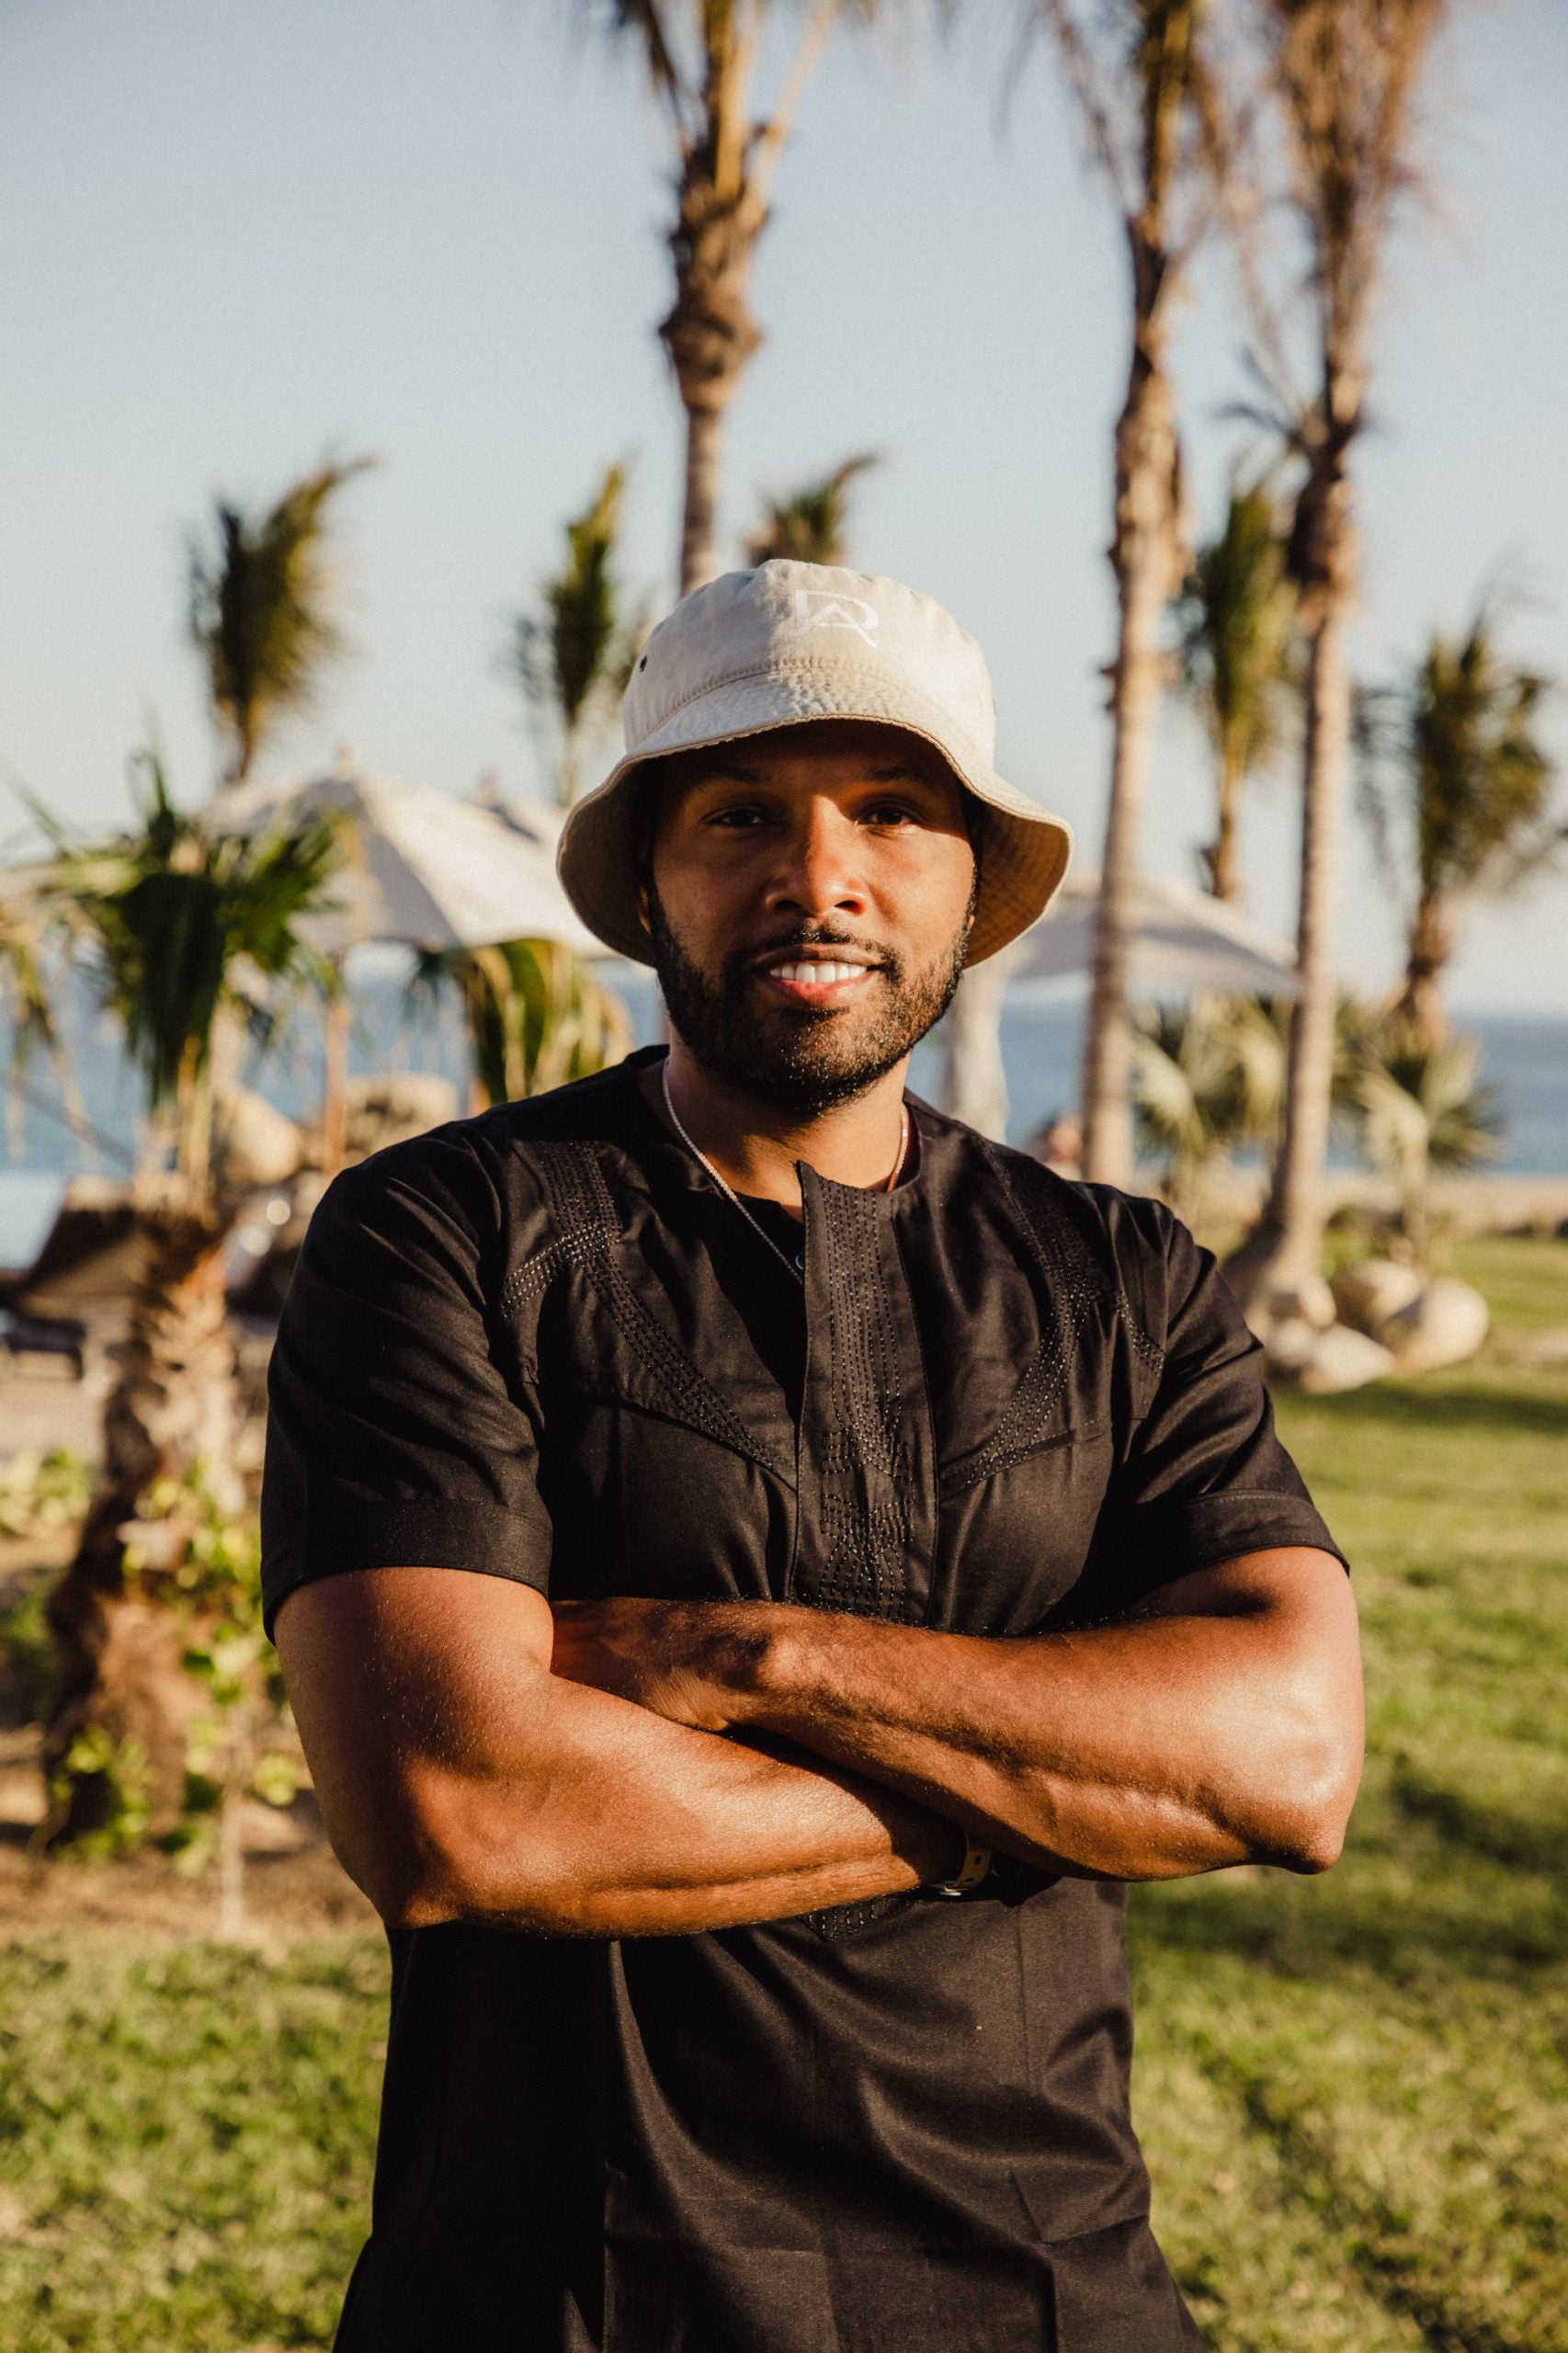 Exclusive: Yandy Smith-Harris Celebrated Turning 40 With Mendeecees And Her Closest Friends At This New Luxury Resort In Los Cabos